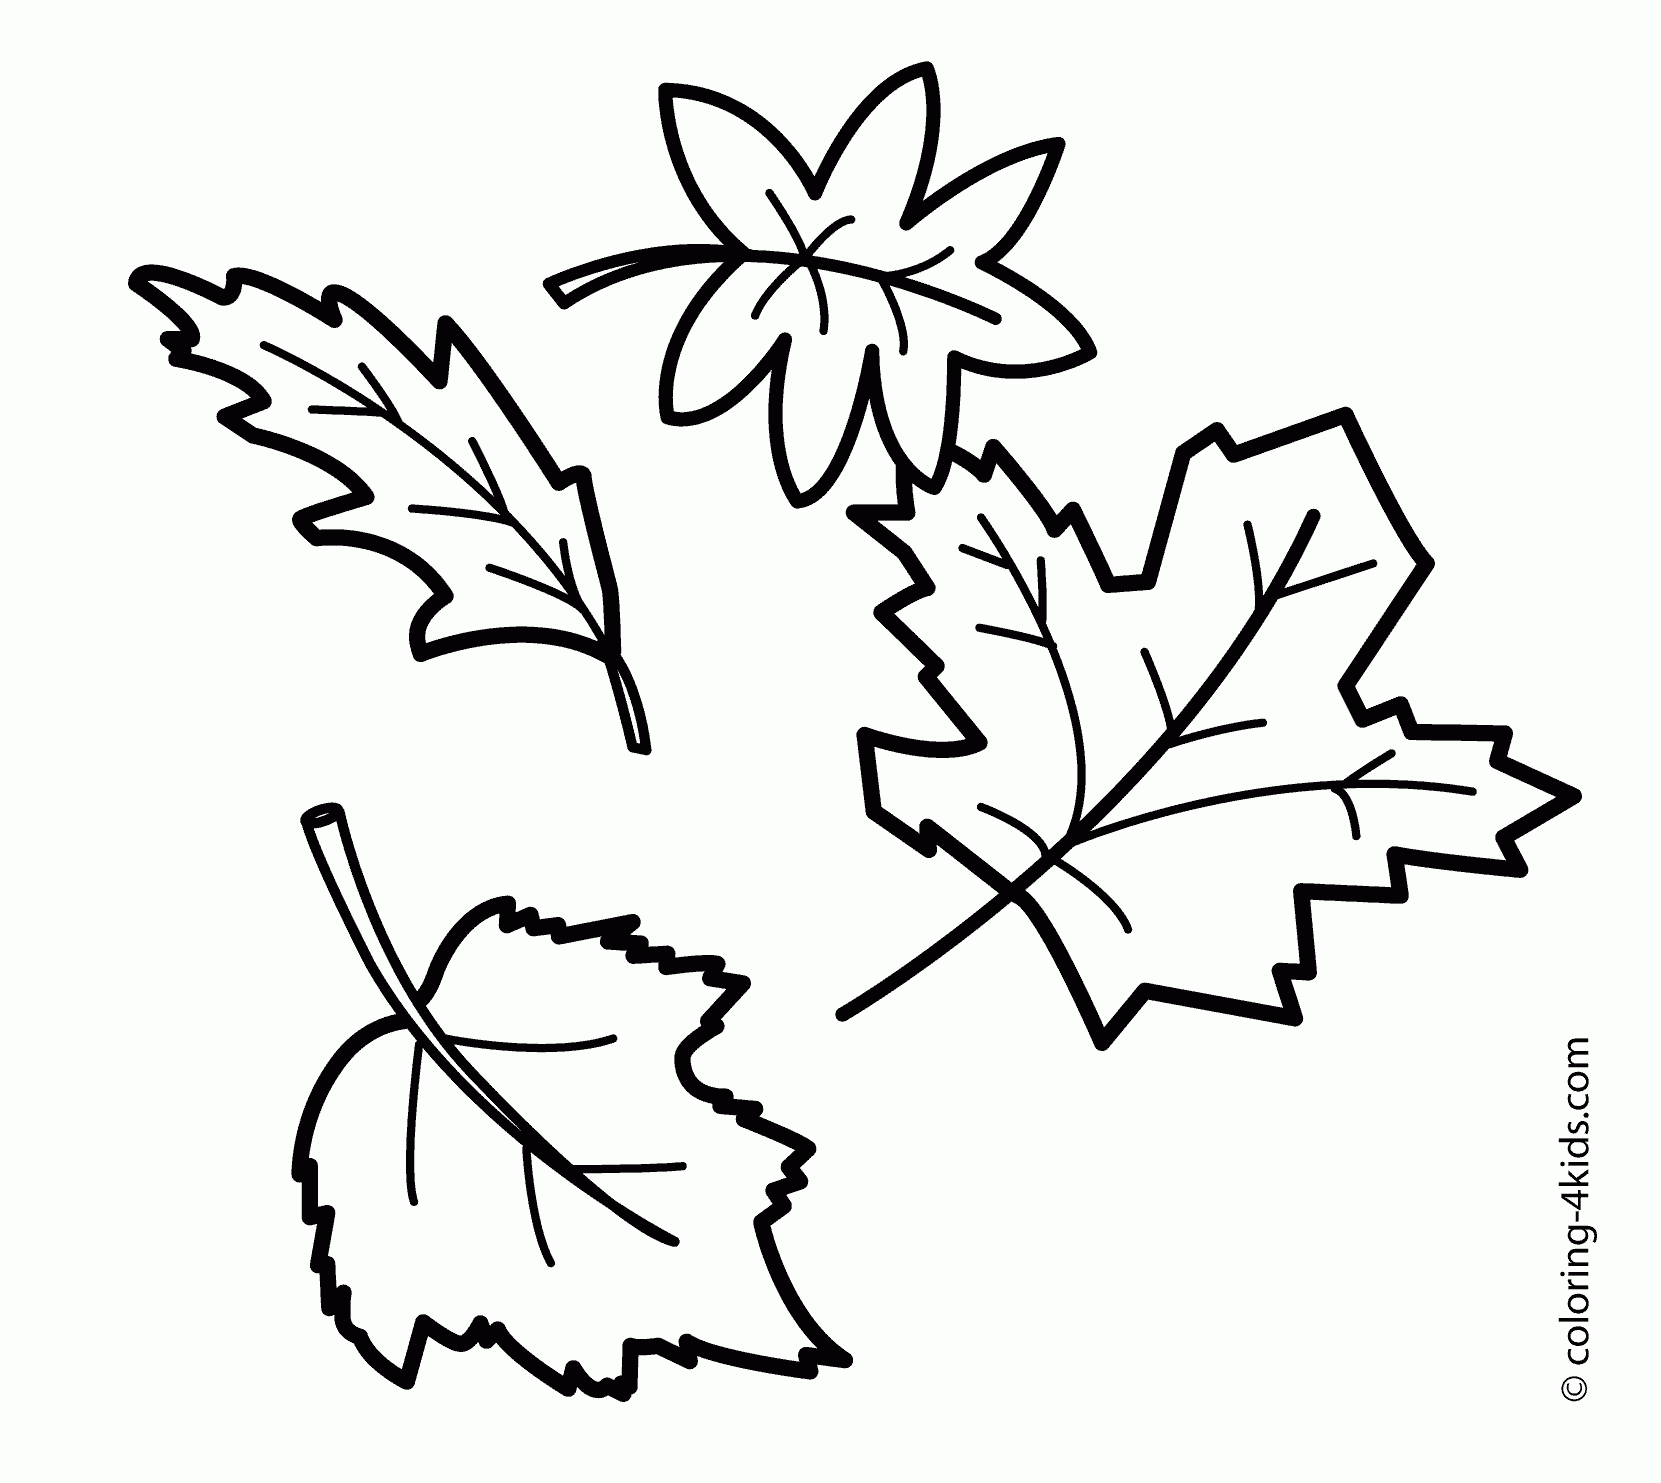 19 Free Pictures For: Fall Leaf Coloring Pages. Temoon - Coloring - Free Printable Fall Leaves Coloring Pages